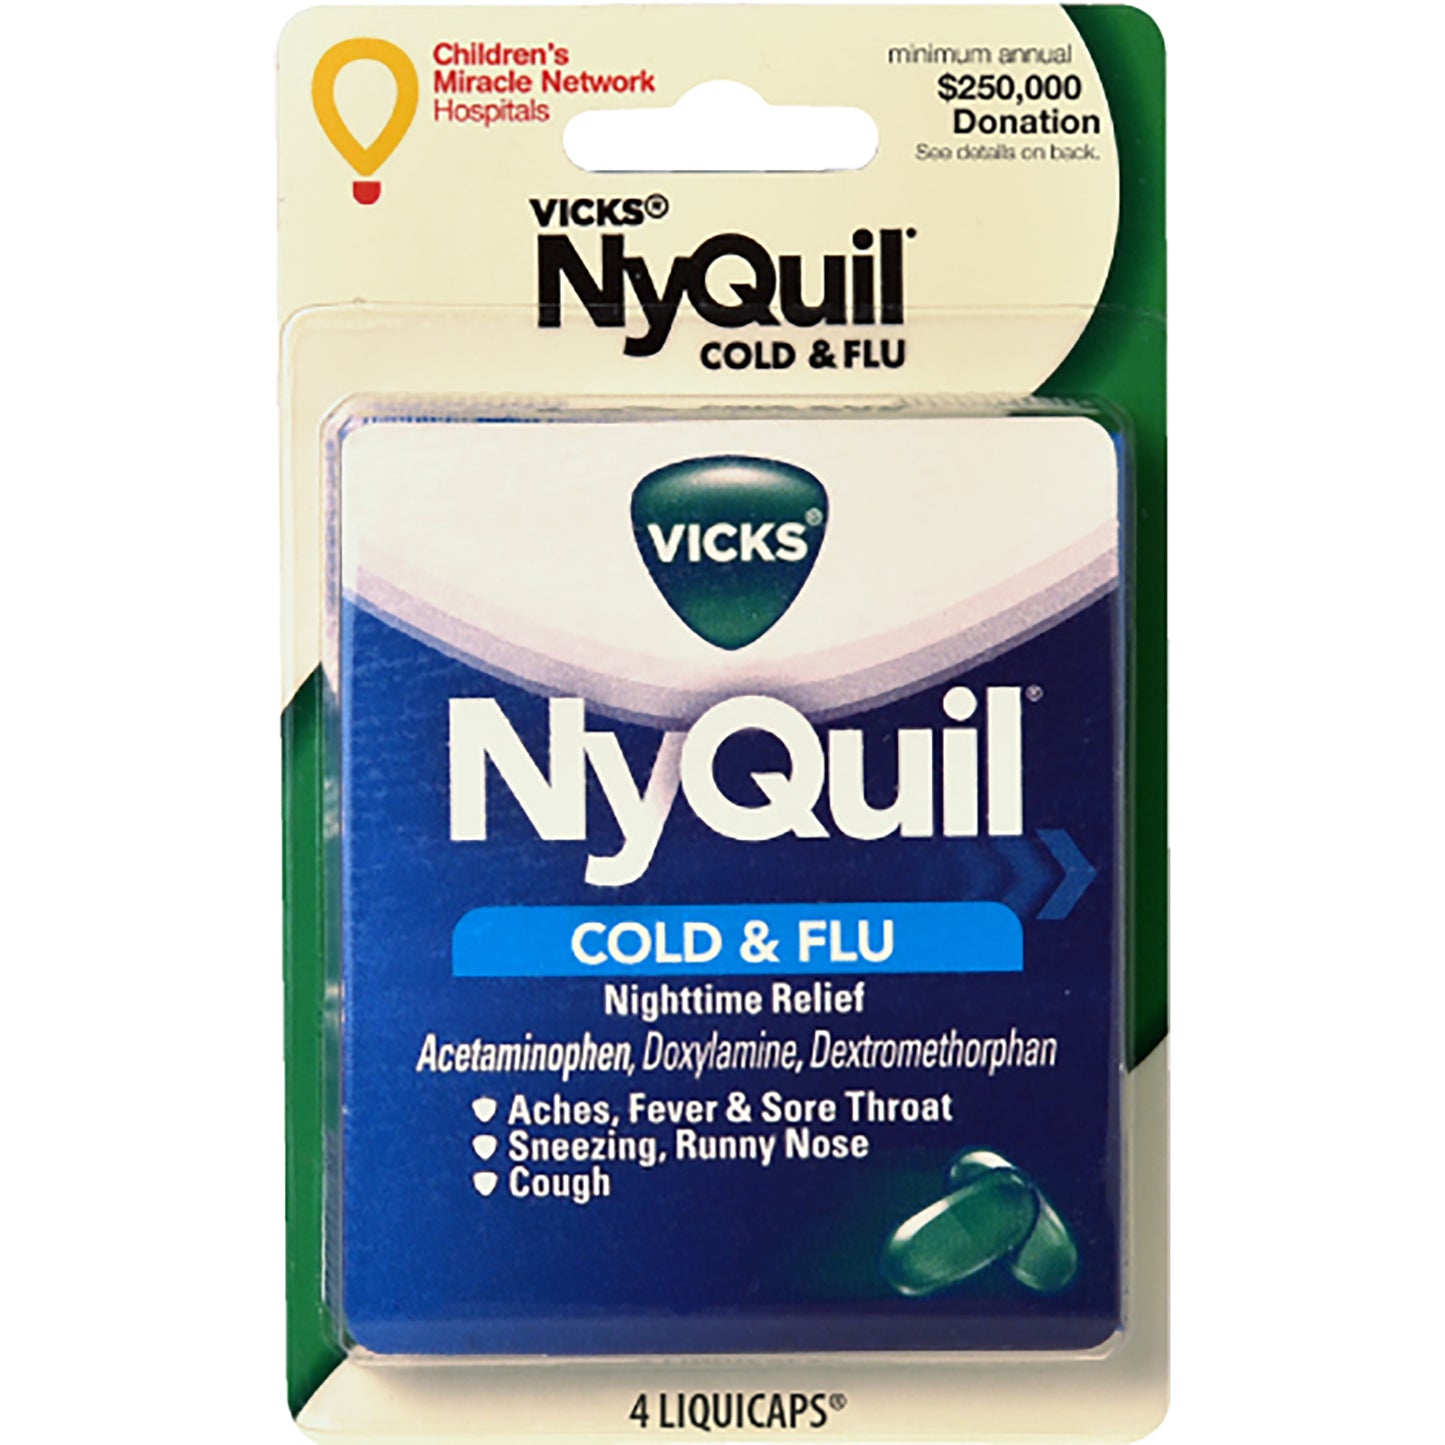 NYQUIL LIQUICAPS